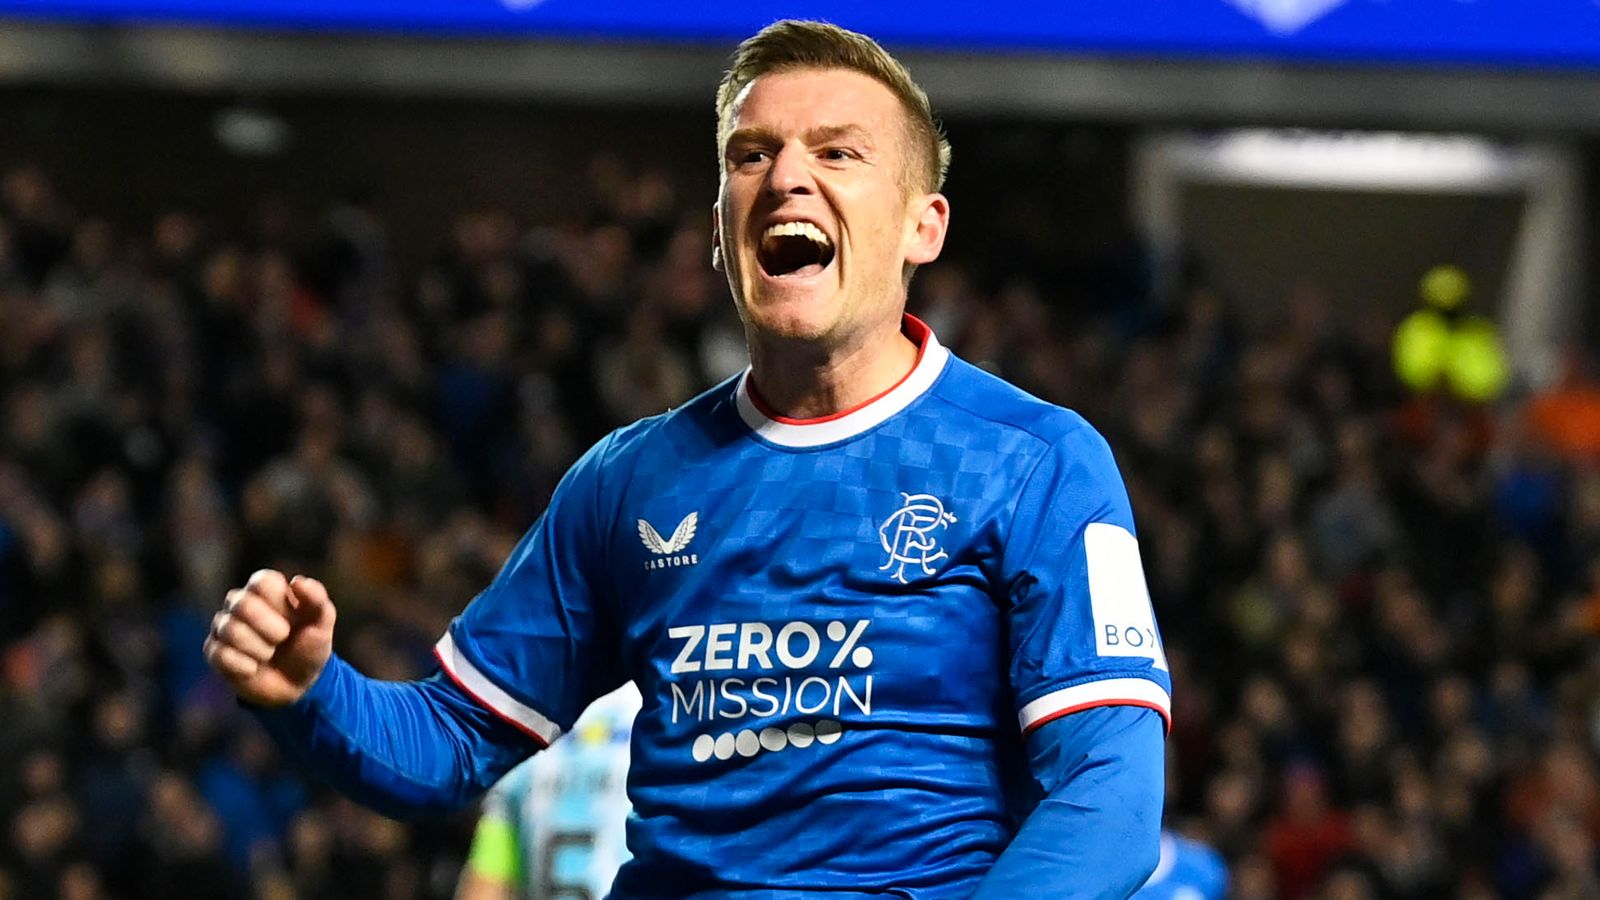 Rangers have 'exciting times' ahead under Michael Beale, says Steven Davis